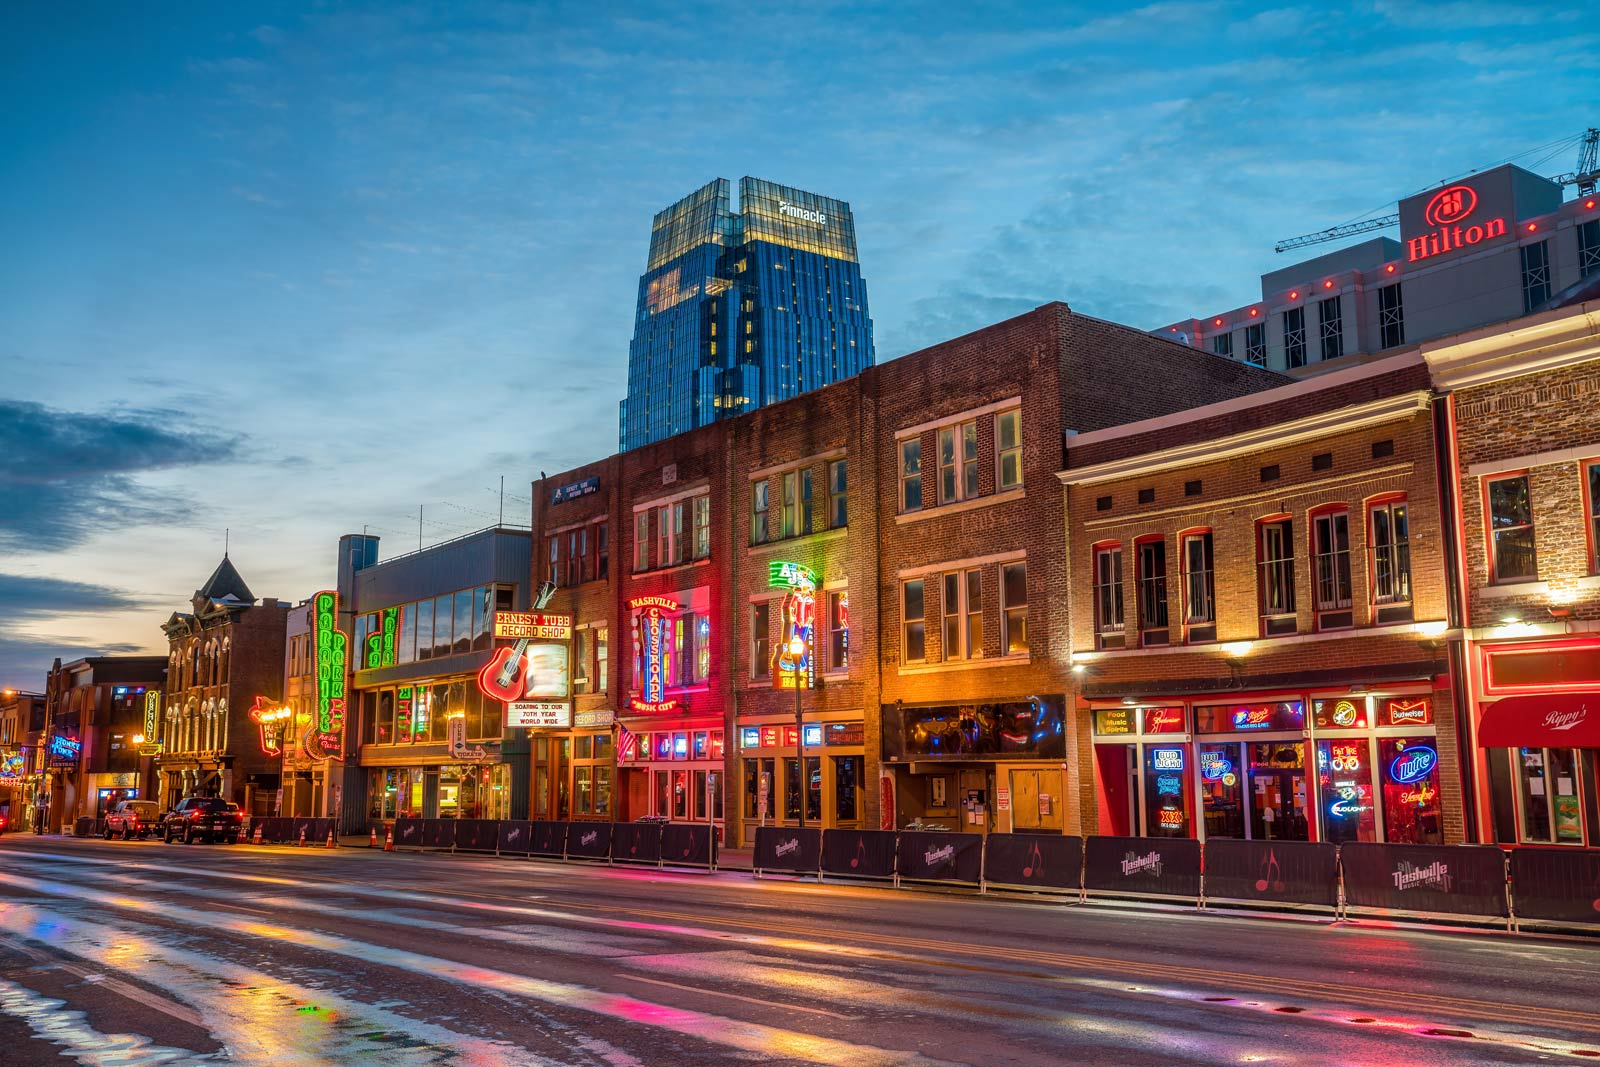 Where to Stay in Nashville